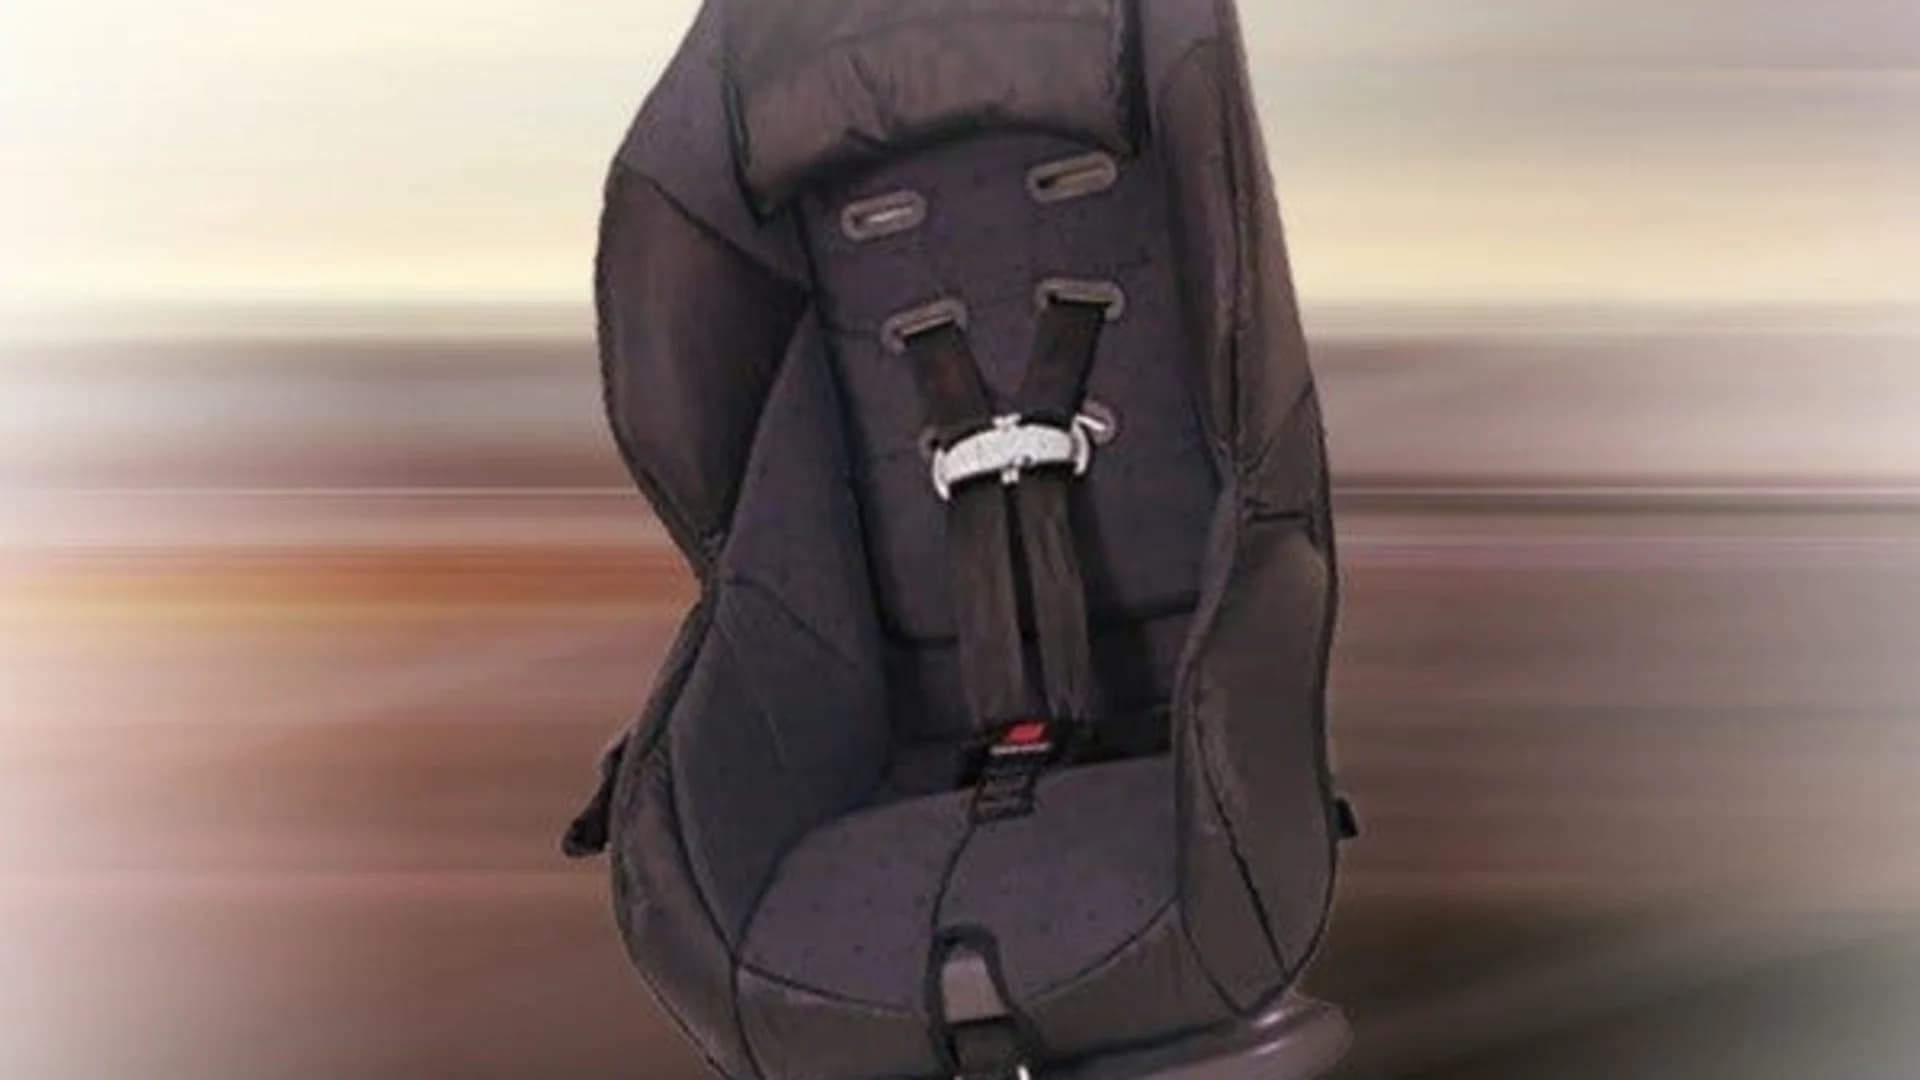 New age, weight requirements for car seats begin today